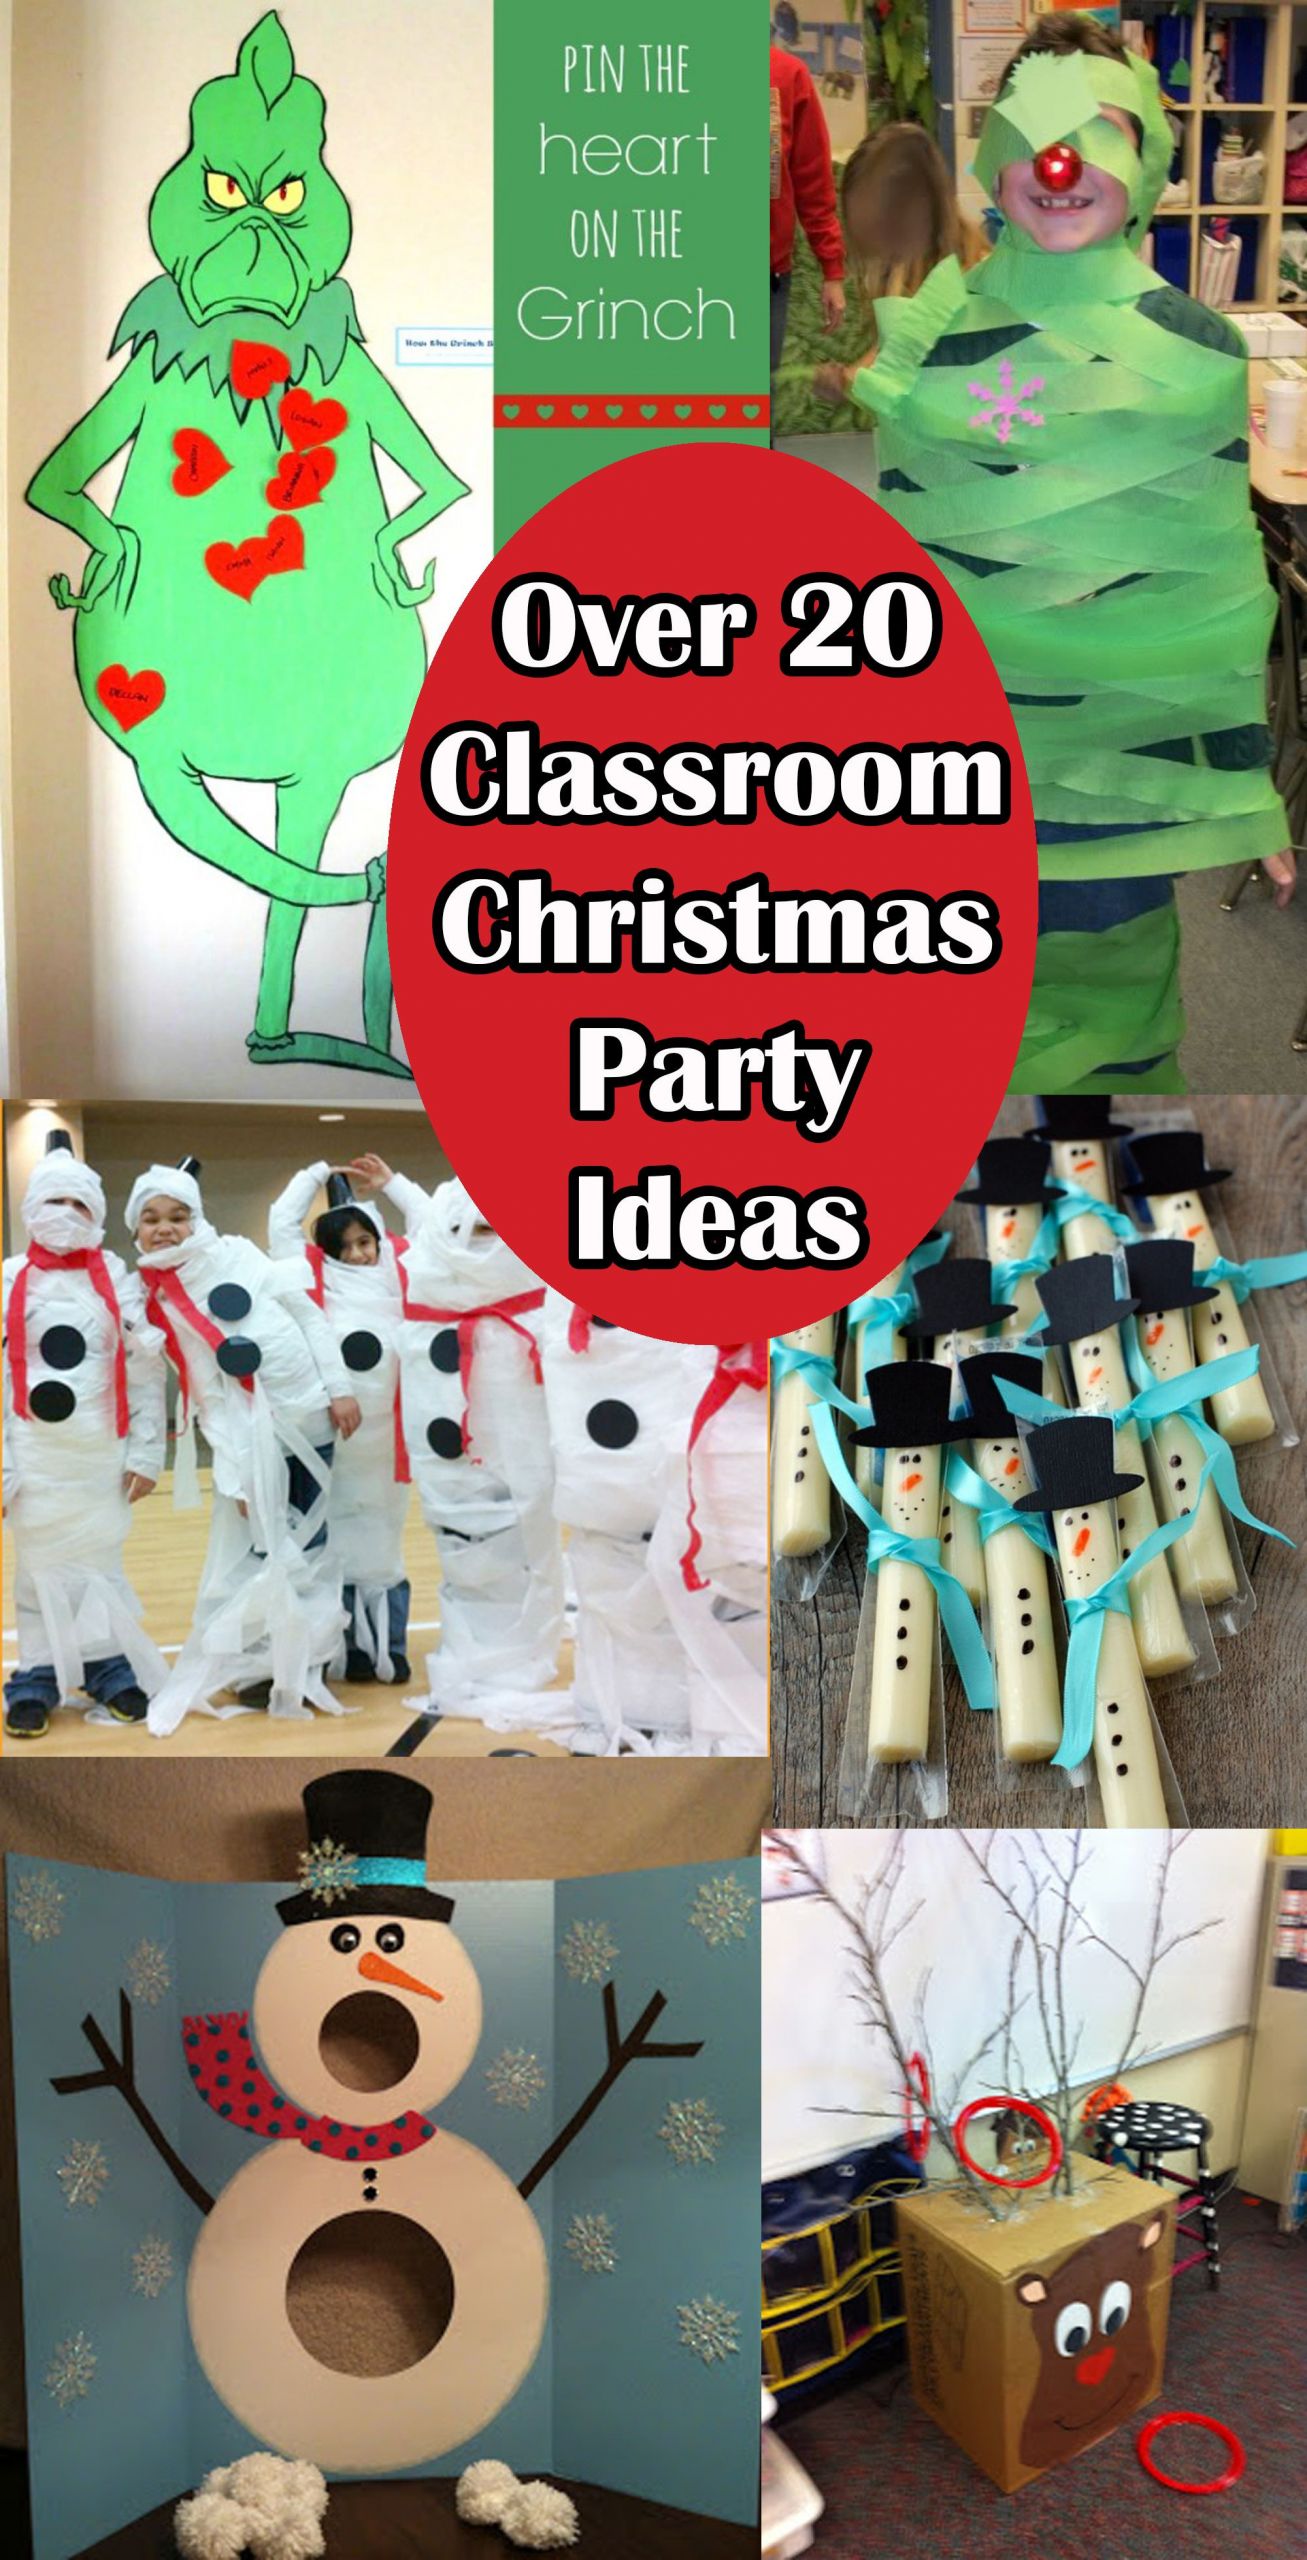 Christmas Party Ideas For Kindergarten Classes
 Classroom Christmas Party Ideas